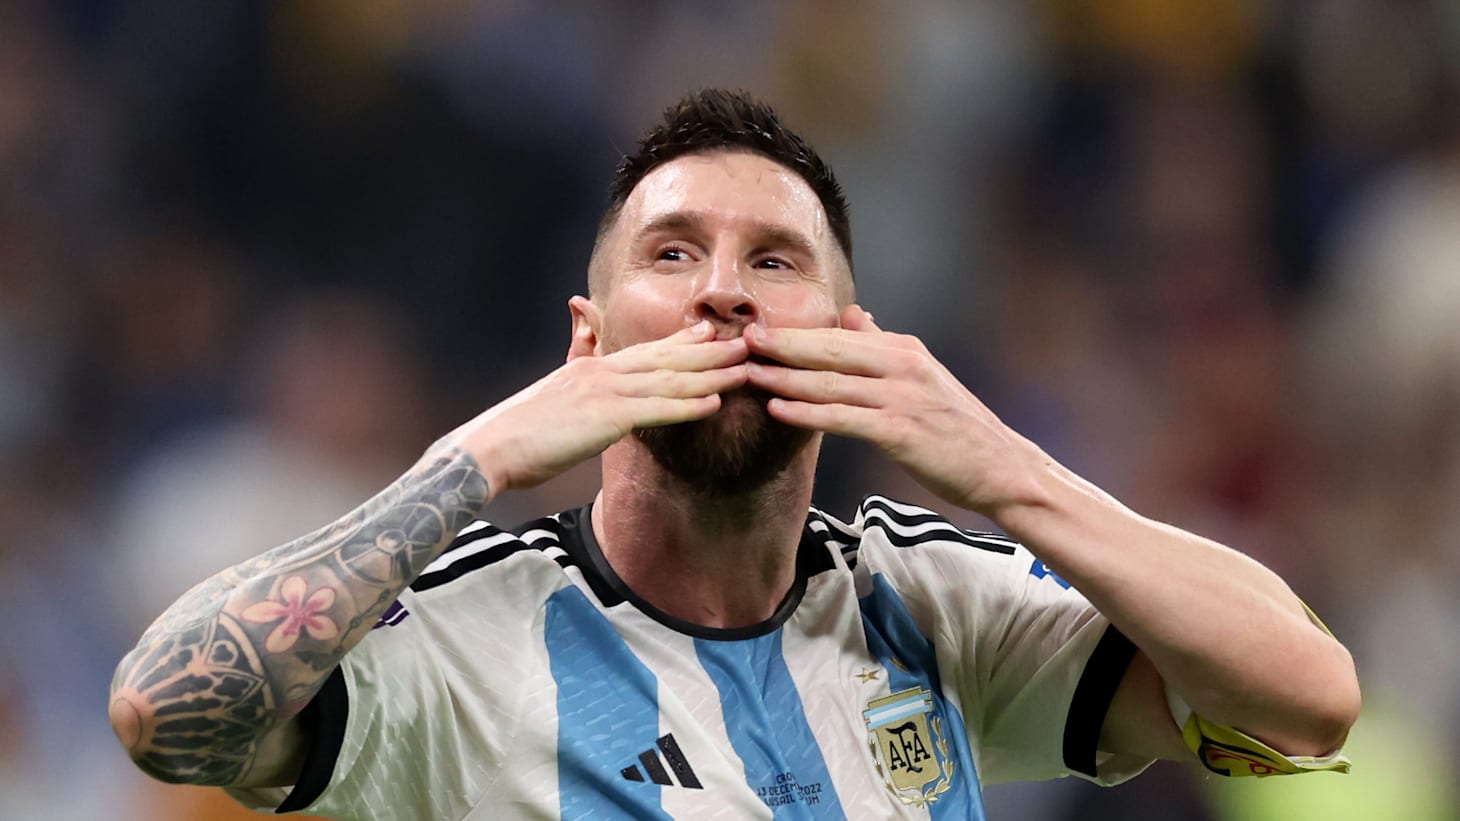 Argentina vs France 2022 World Cup final Five players who could lead their country to glory in Qatar